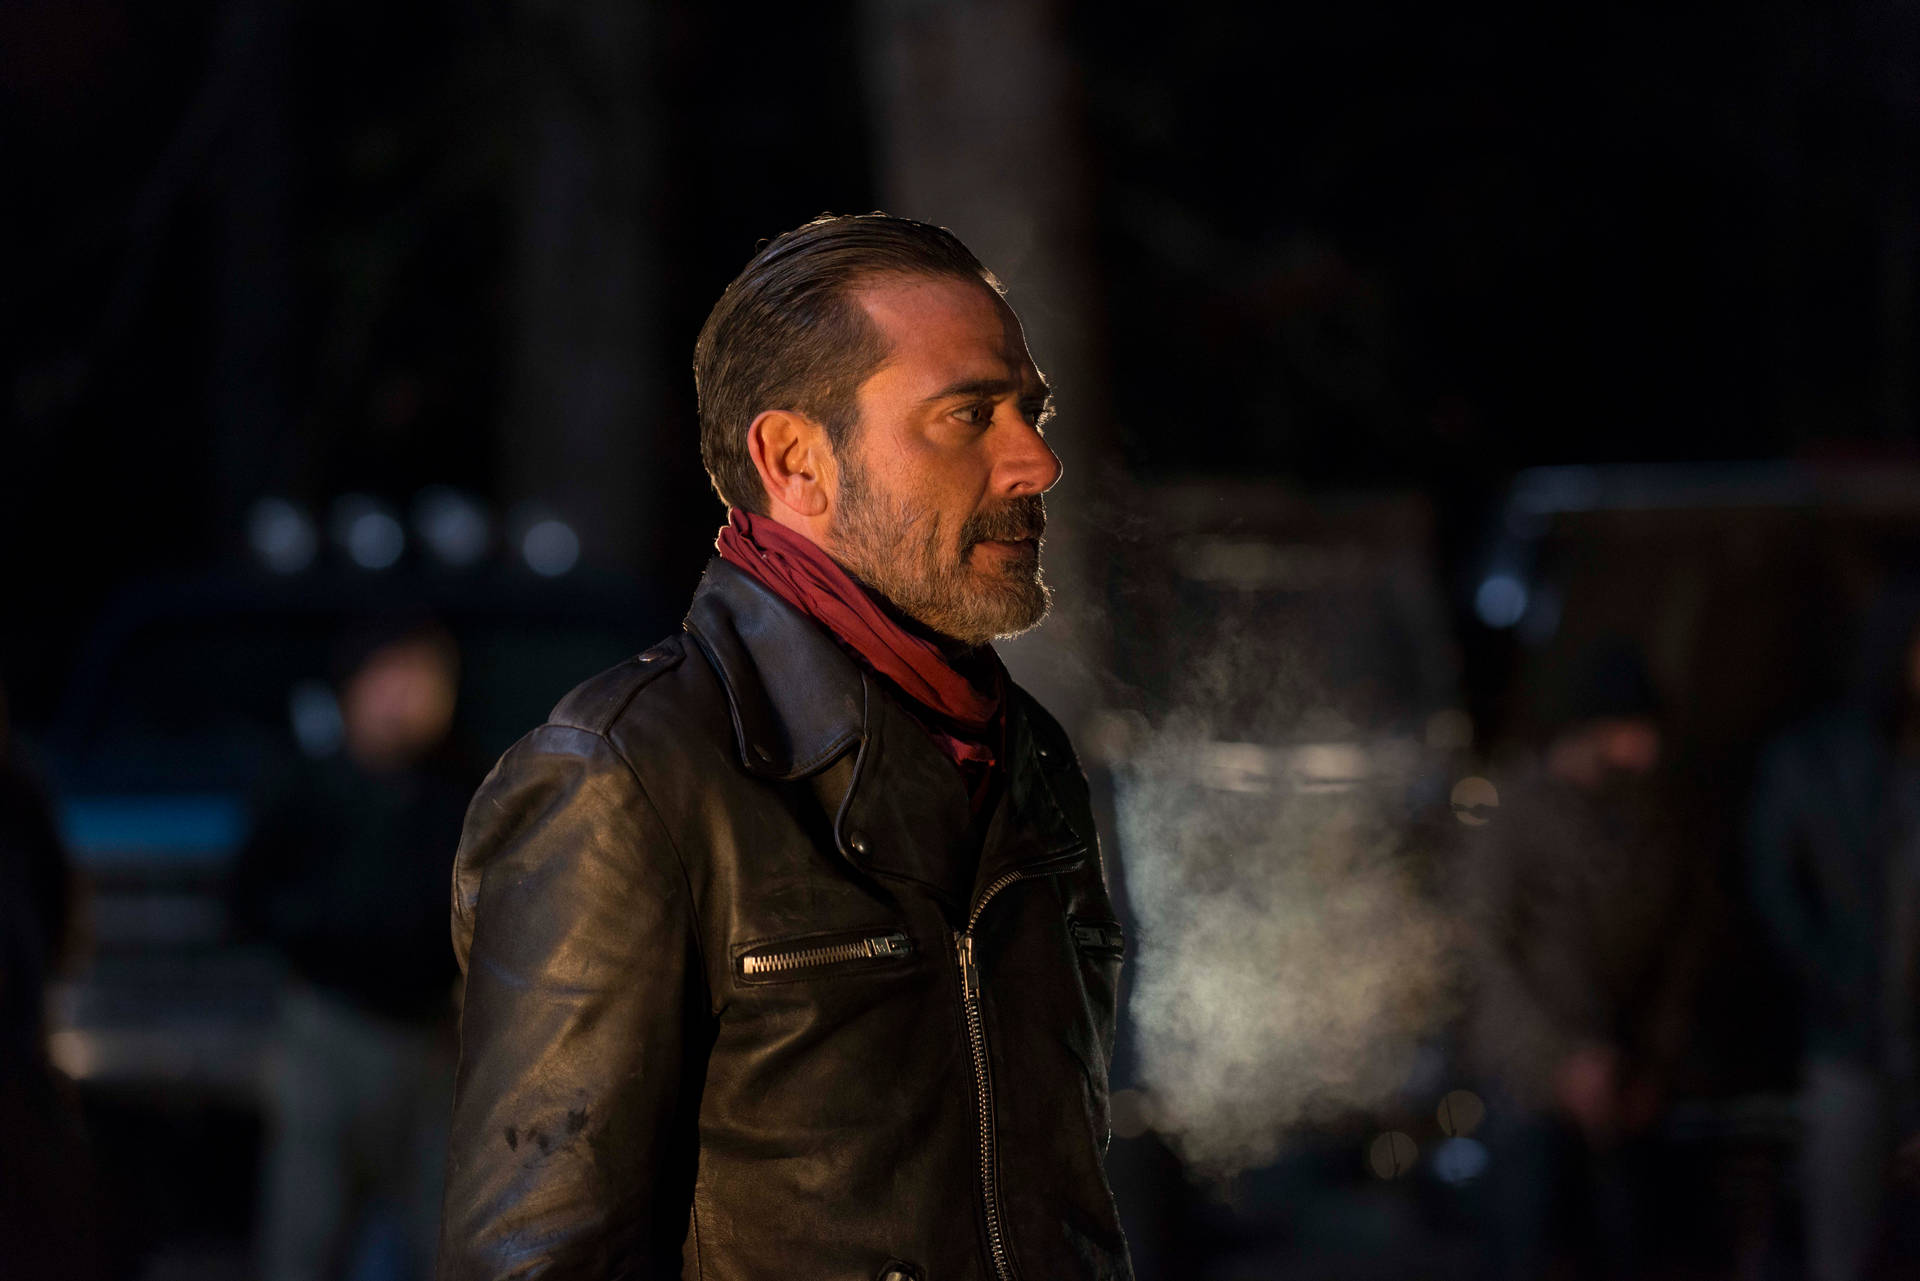 Negan During A Cold Night Background